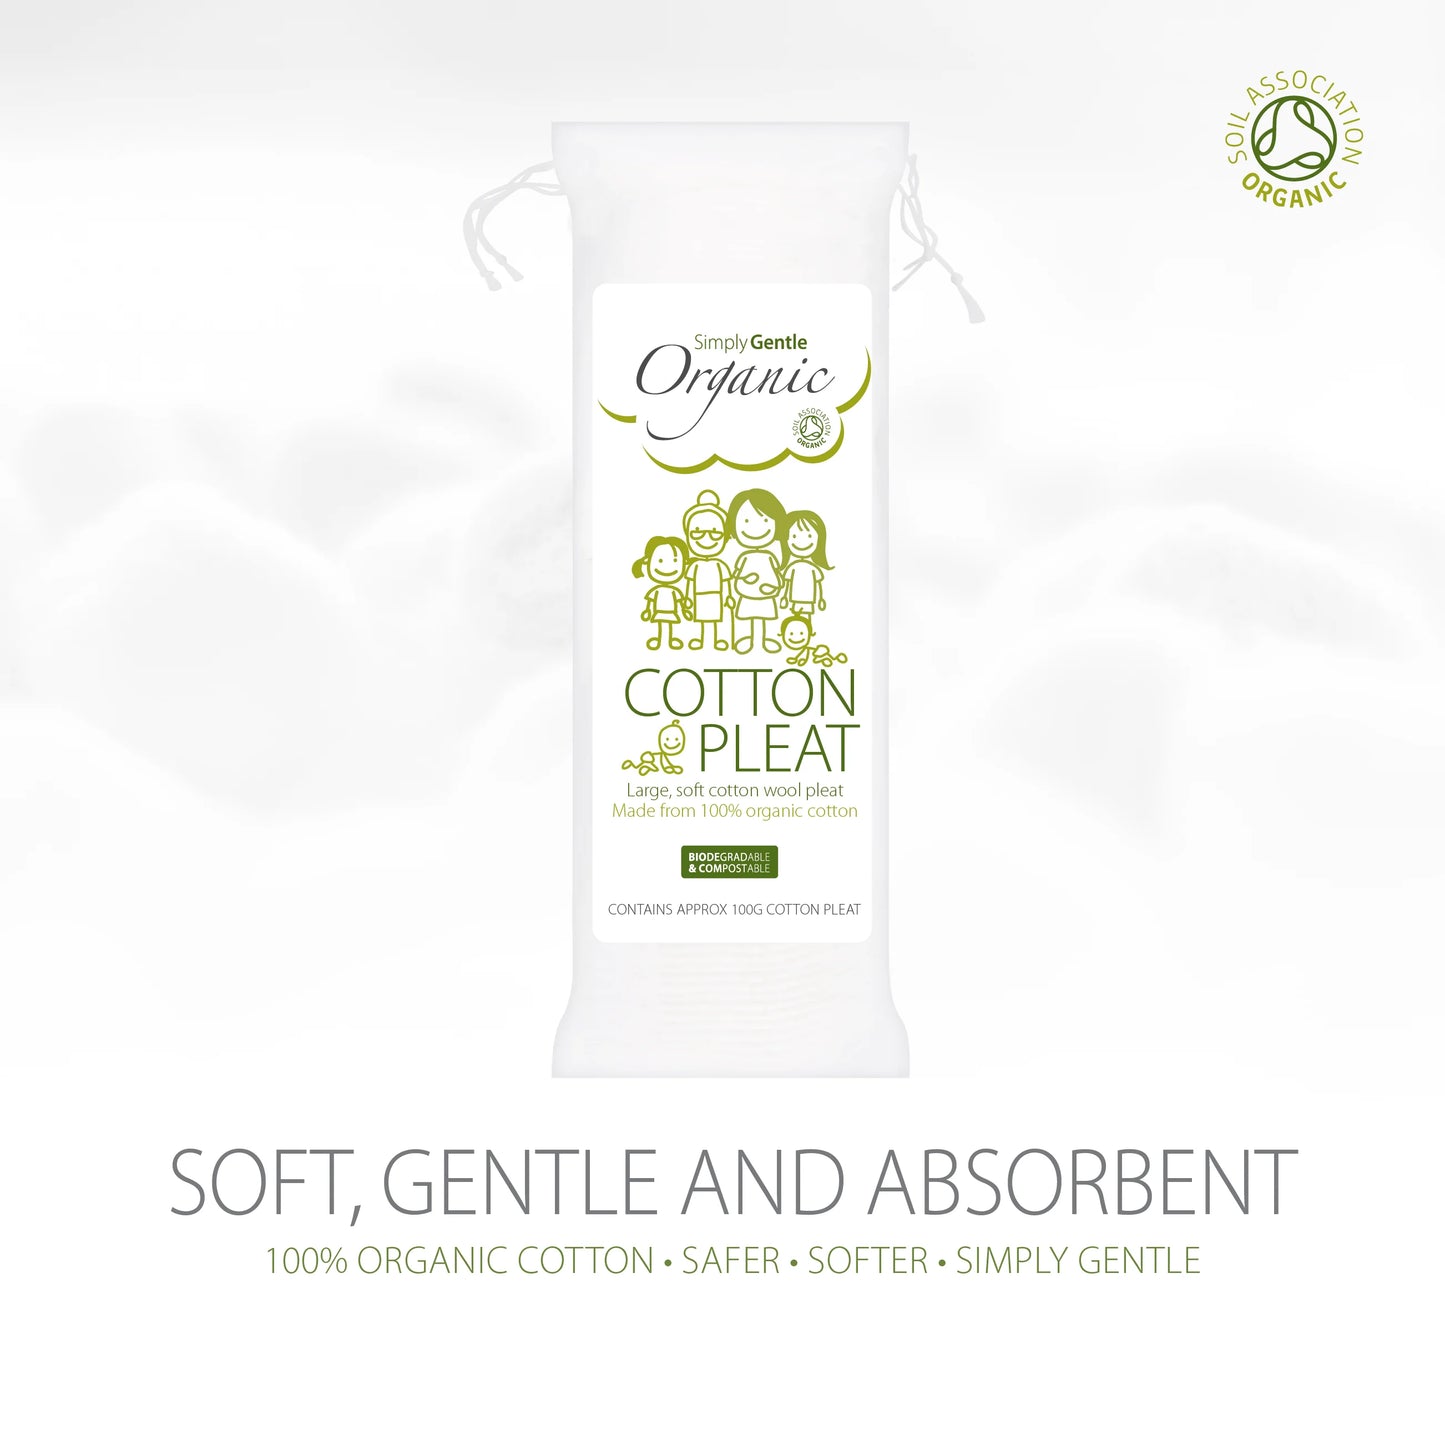 Simply Gentle Organic Cotton Pleat (Easy Tear) 100g, Soft Gentle & absorbent